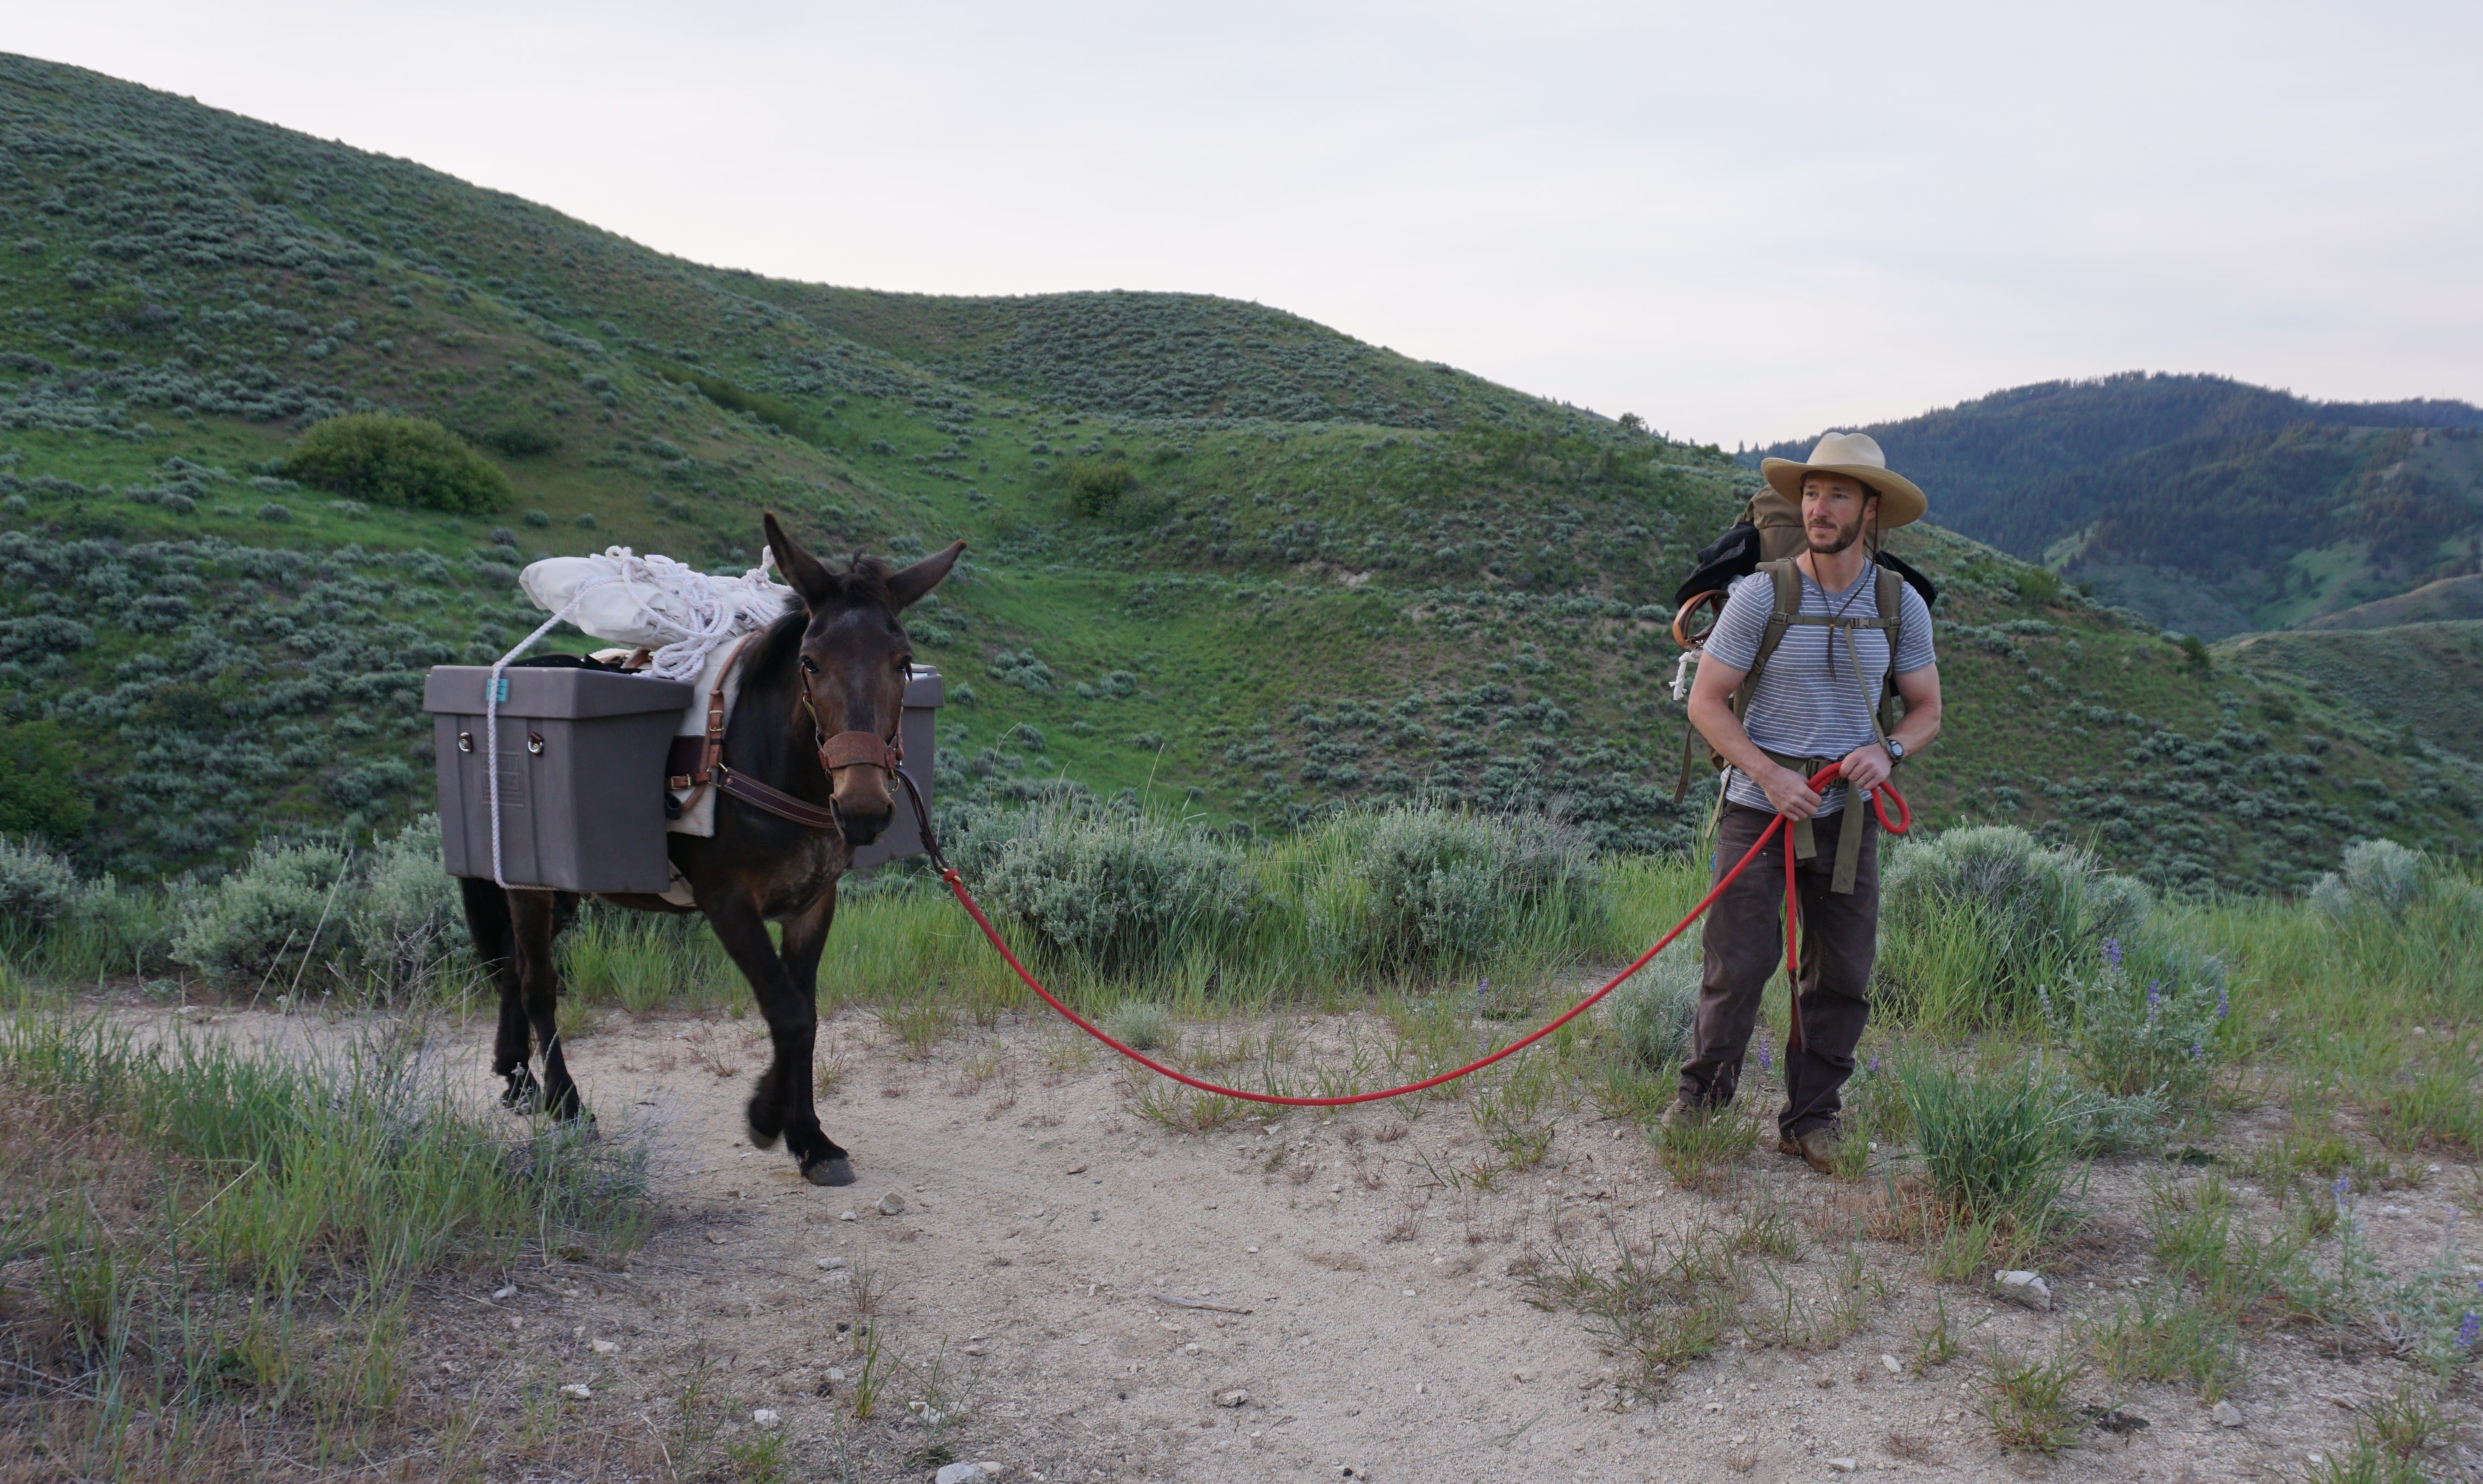 Matt Bishop and his mule, Richard, arrive at the spot where Bishop set up his coffee stand.